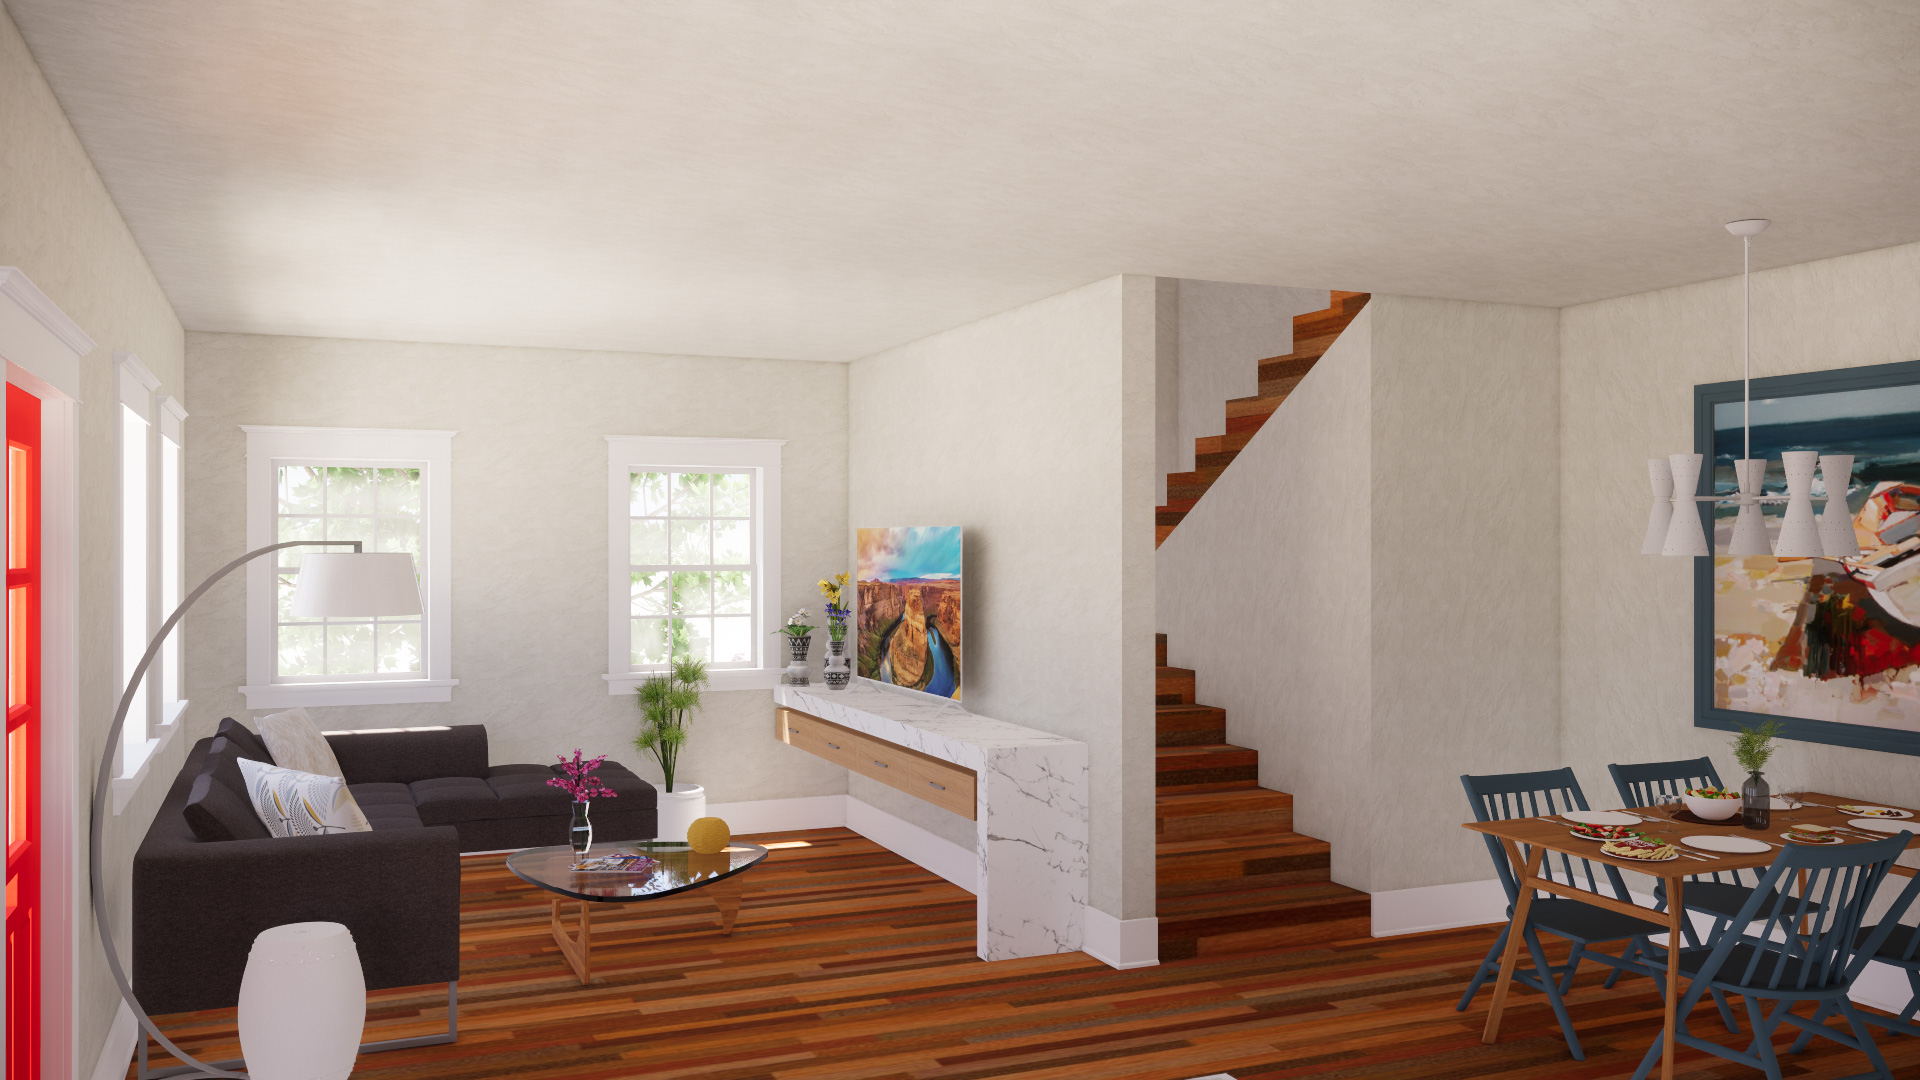 Interior render of two story style, with seating area in foreground and stairs behind.